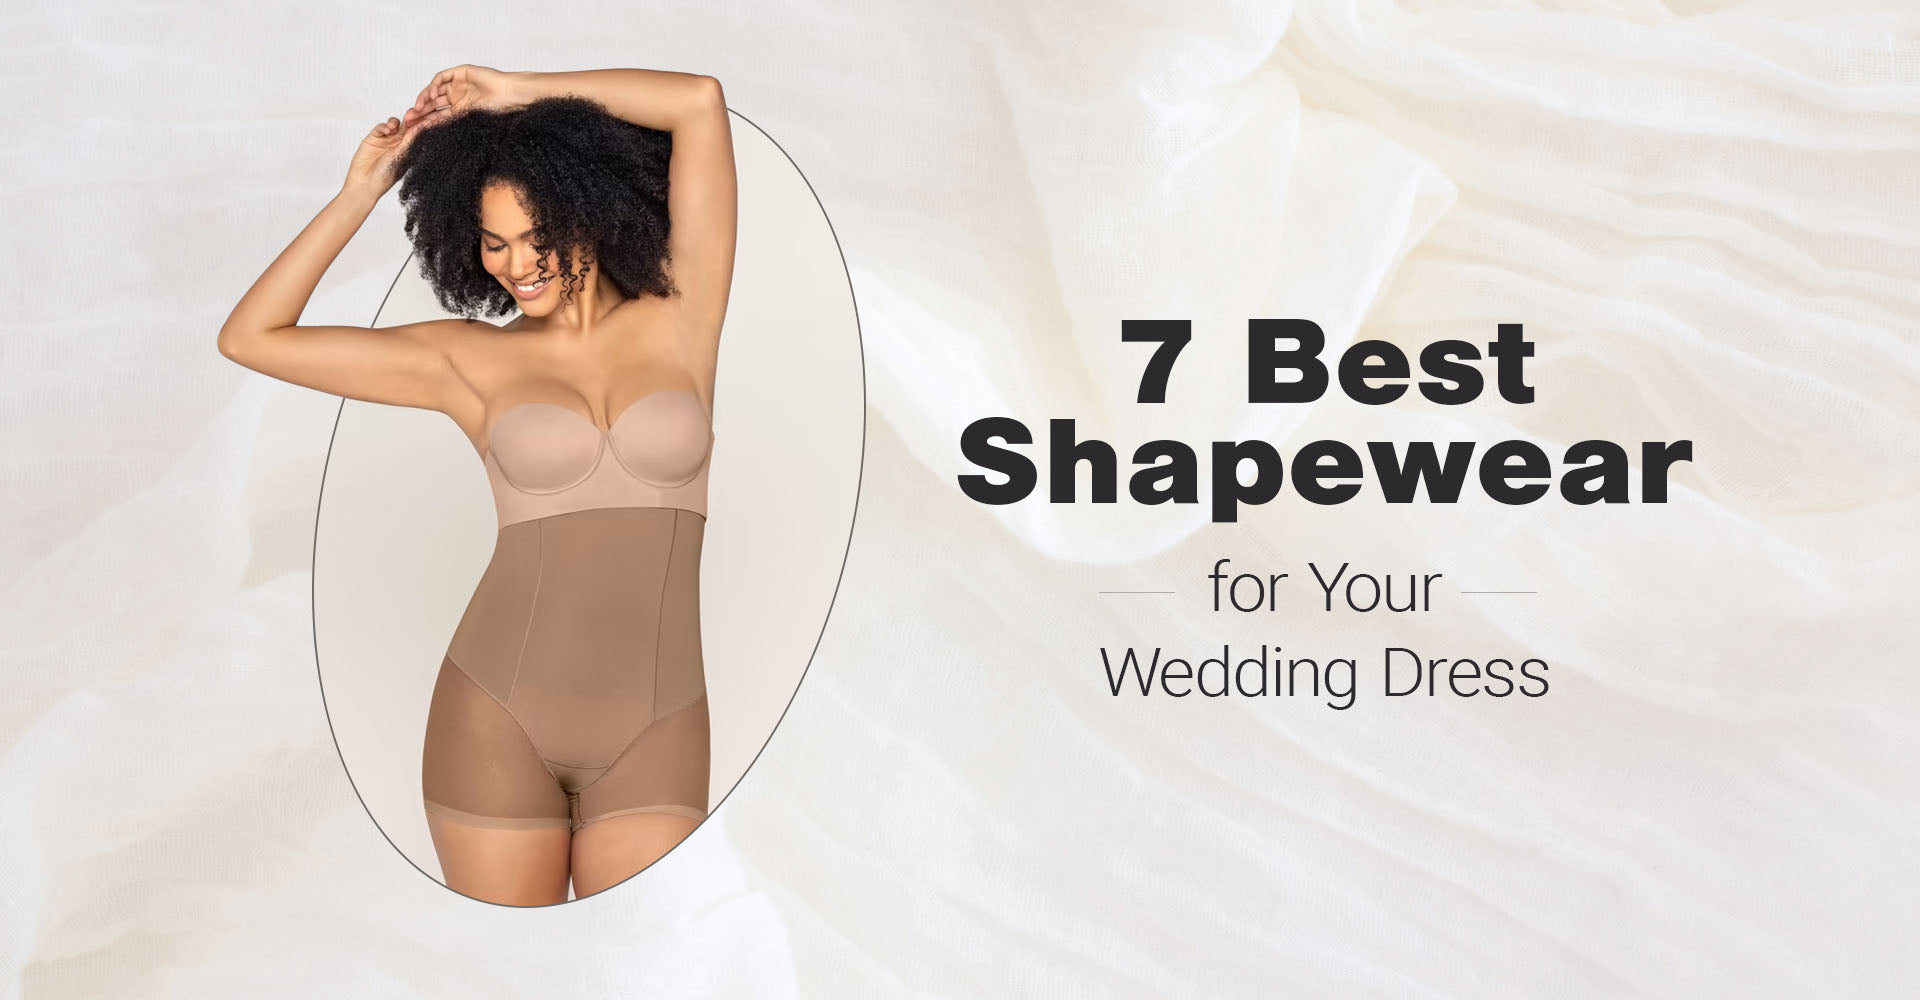 7 Best Shapewear for Your Weeding Dress